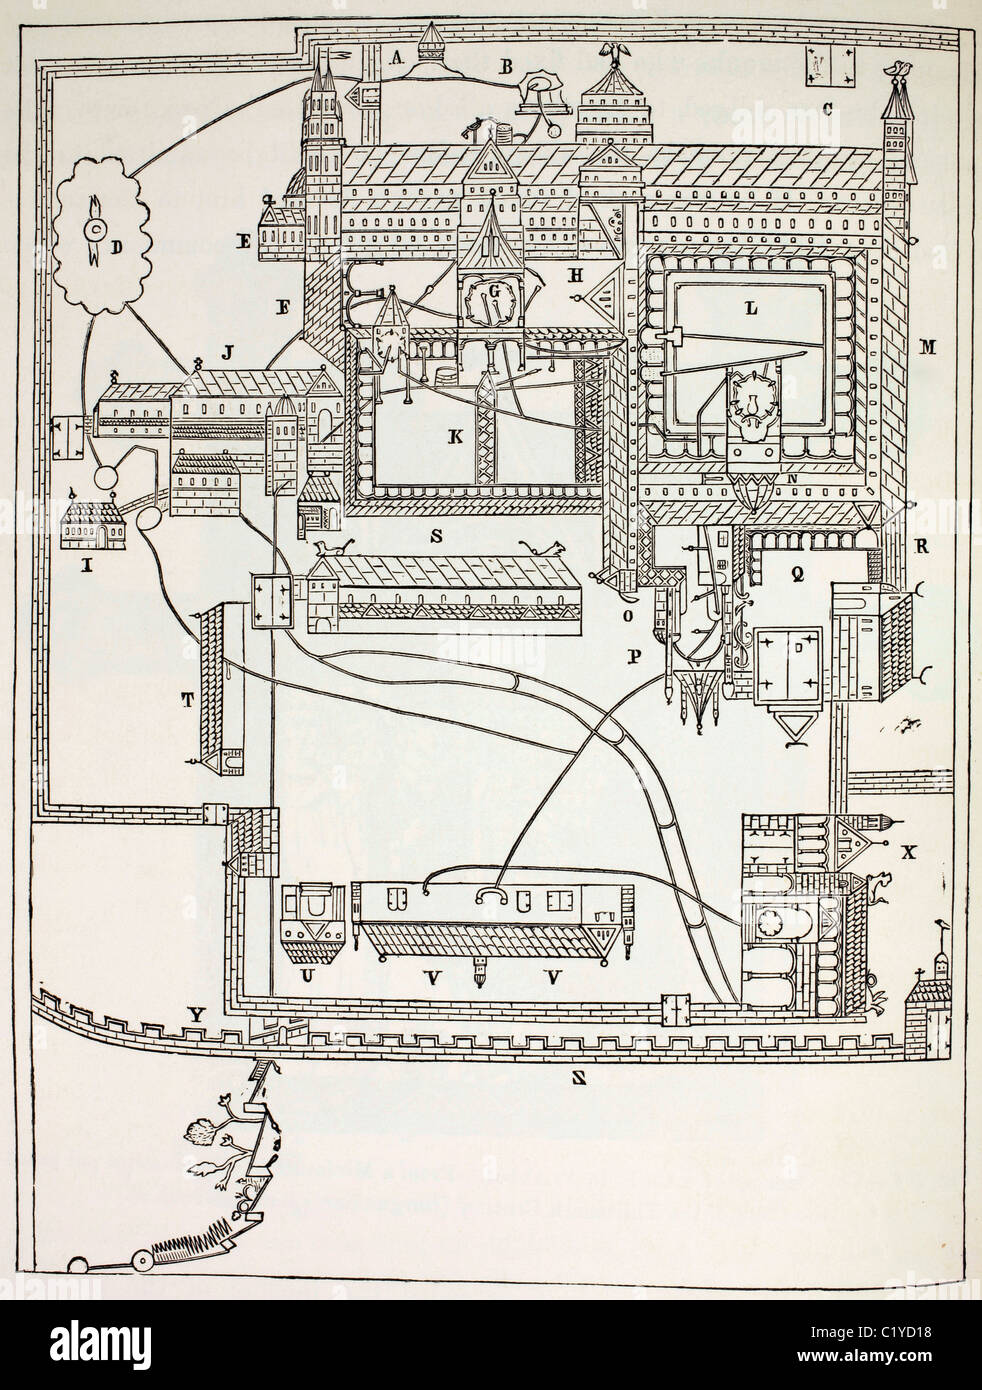 Plan of the Benedictine Monastery at Canterbury, England, in the 12th century. Stock Photo